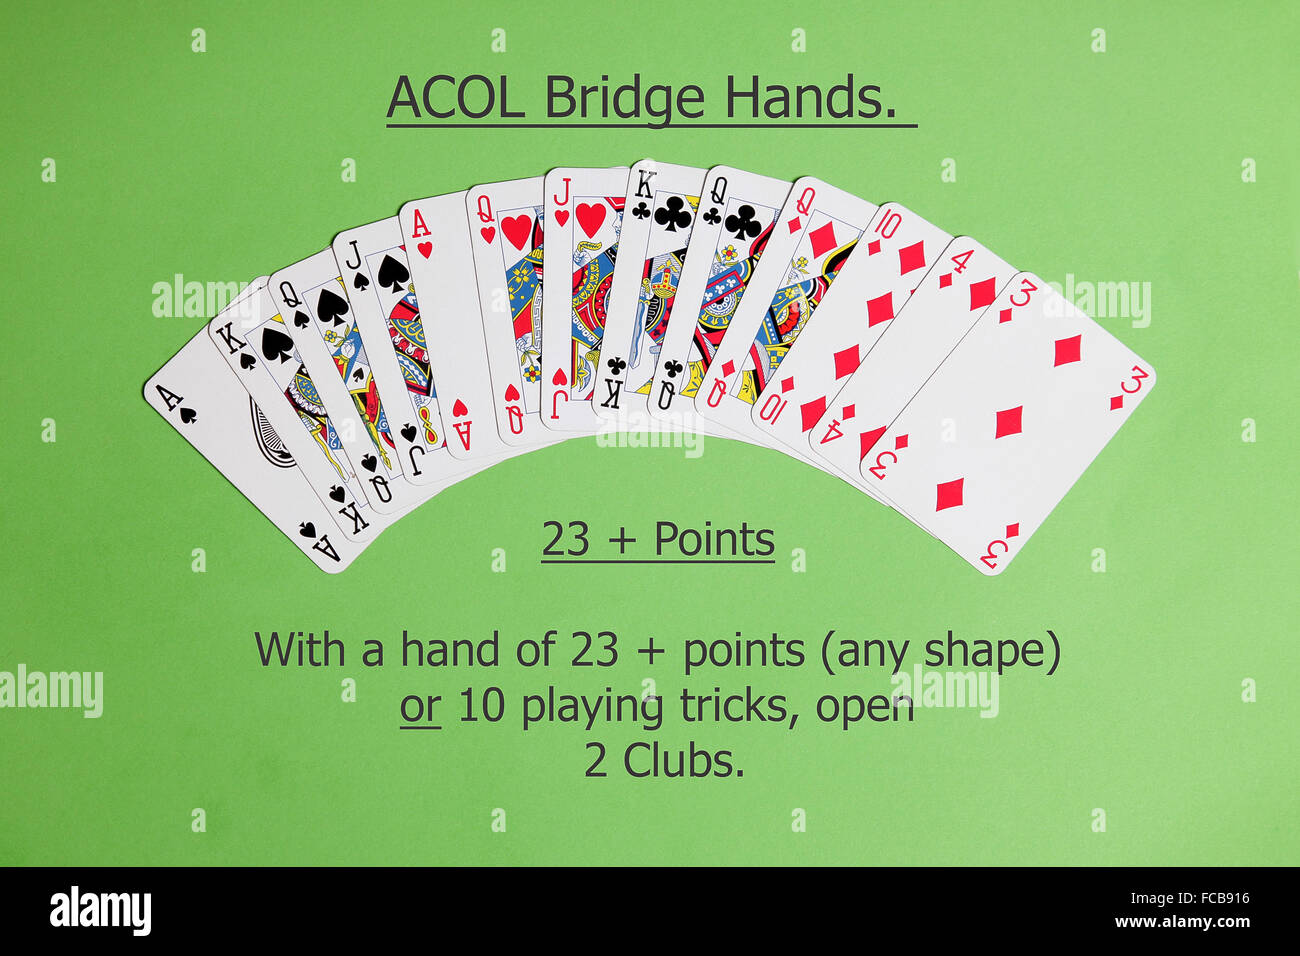 ACOL Contract Bridge Hand. With a hand of 23+ points (any shape) of 10 playing tricks open with two clubs. Stock Photo